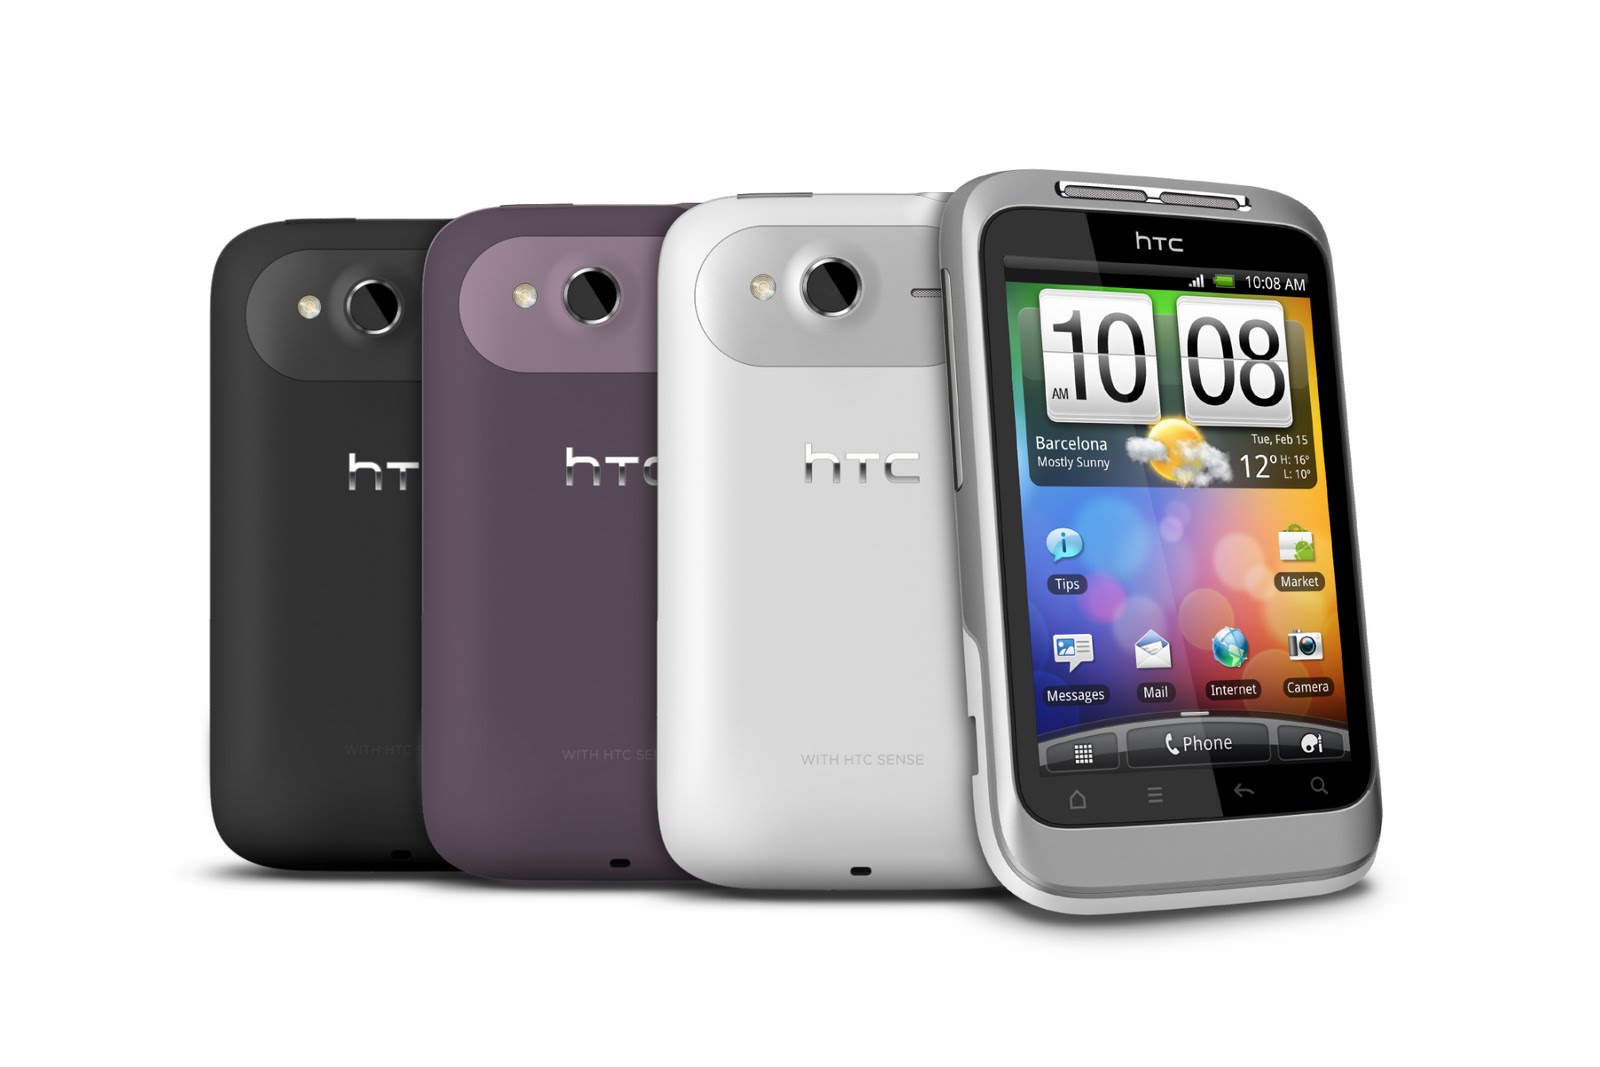 ... Android phone with HTC Sense technology . HTC Wildfire S succeeds the